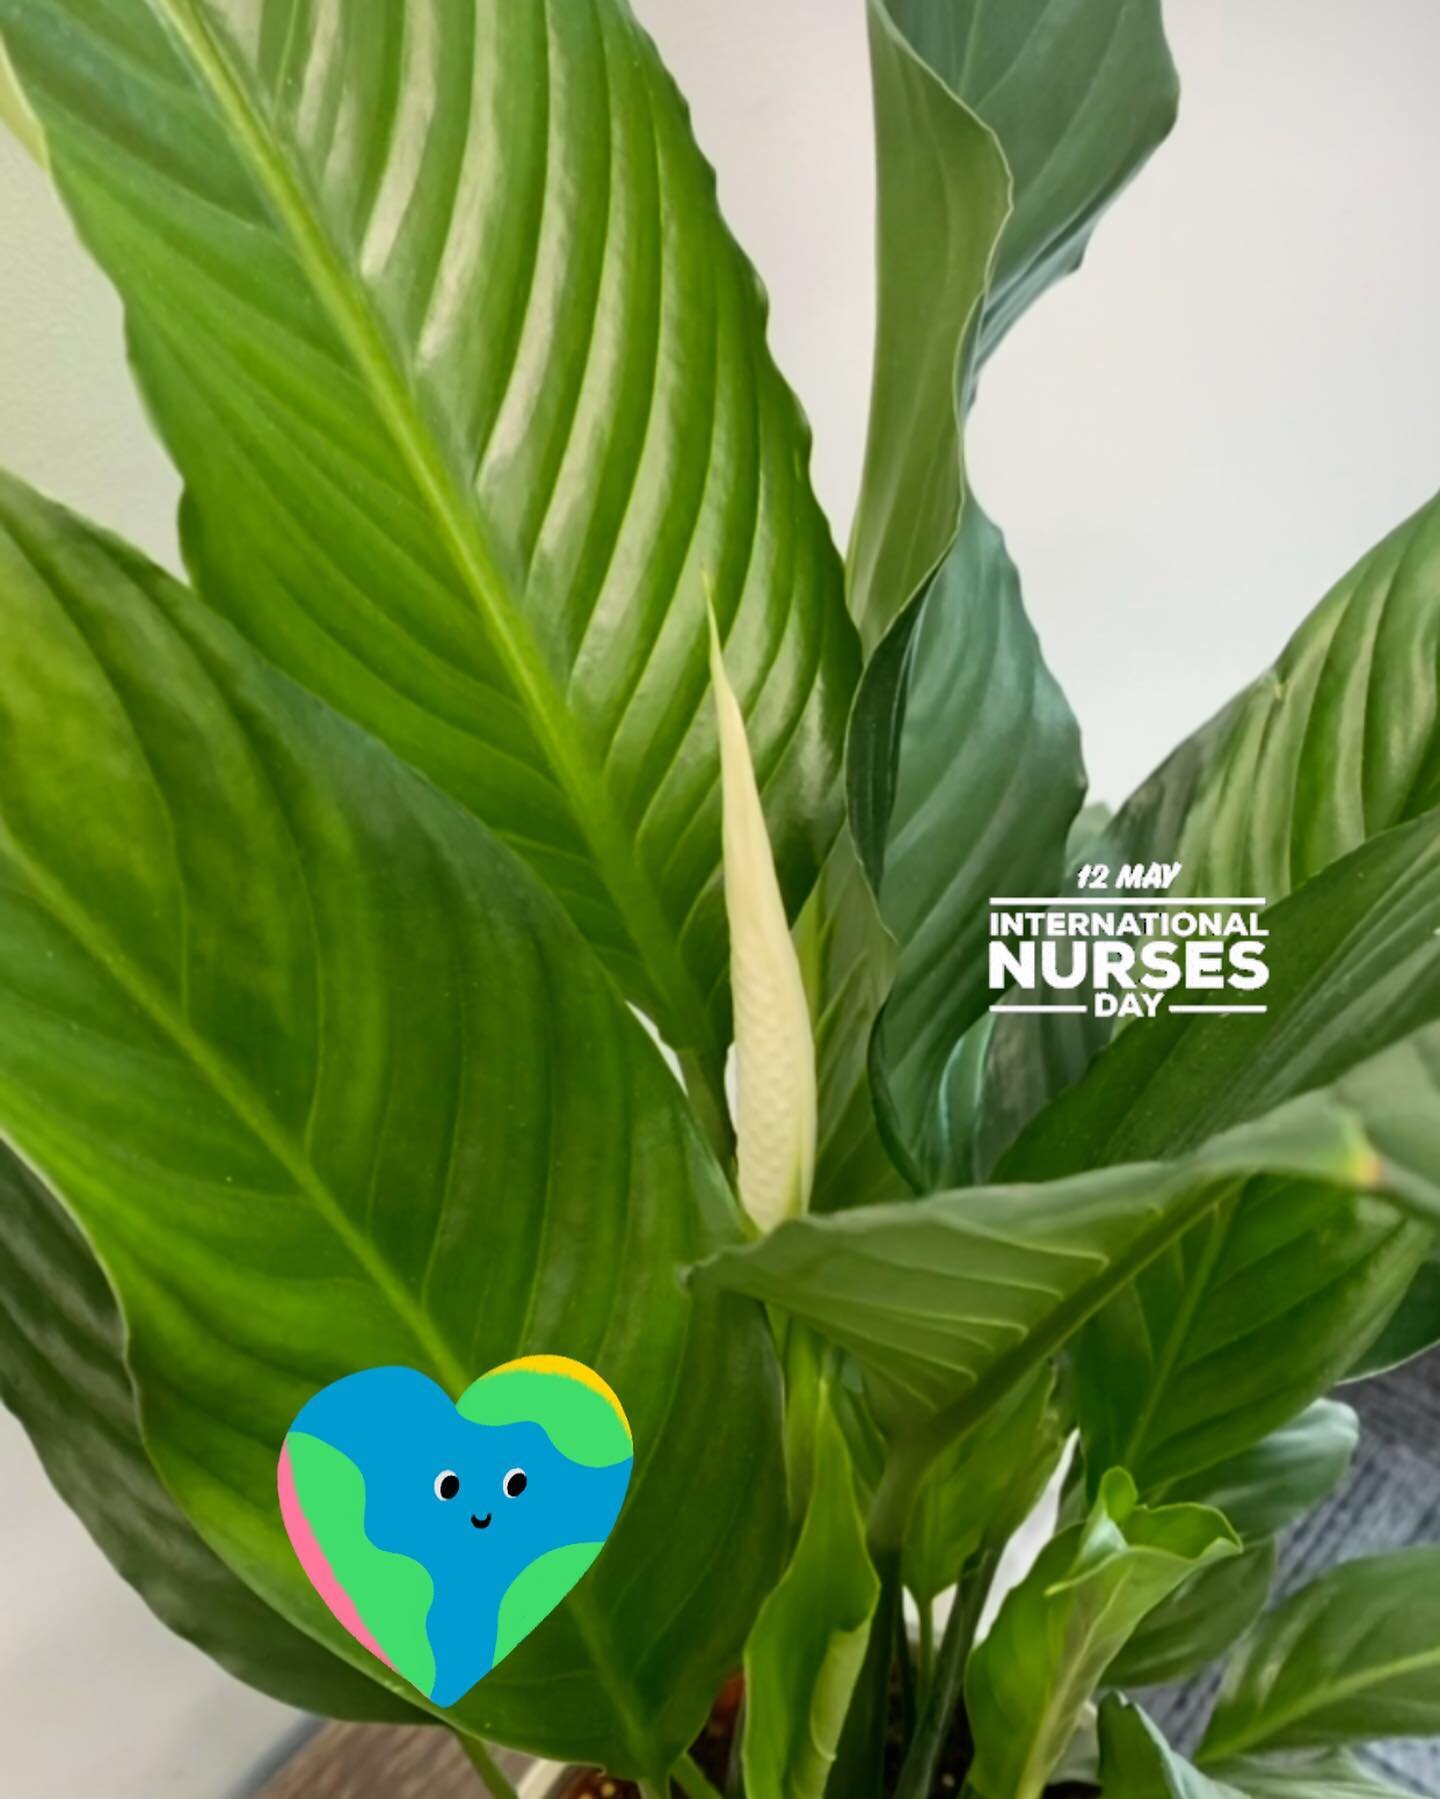 International Nurses&rsquo; Day 🌱 Thank you to all the fertility nurses who take care of our patients - often going above &amp; beyond in communication &amp; compassion. 

The date is the birth anniversary of Florence Nightingale, regarded as the mo